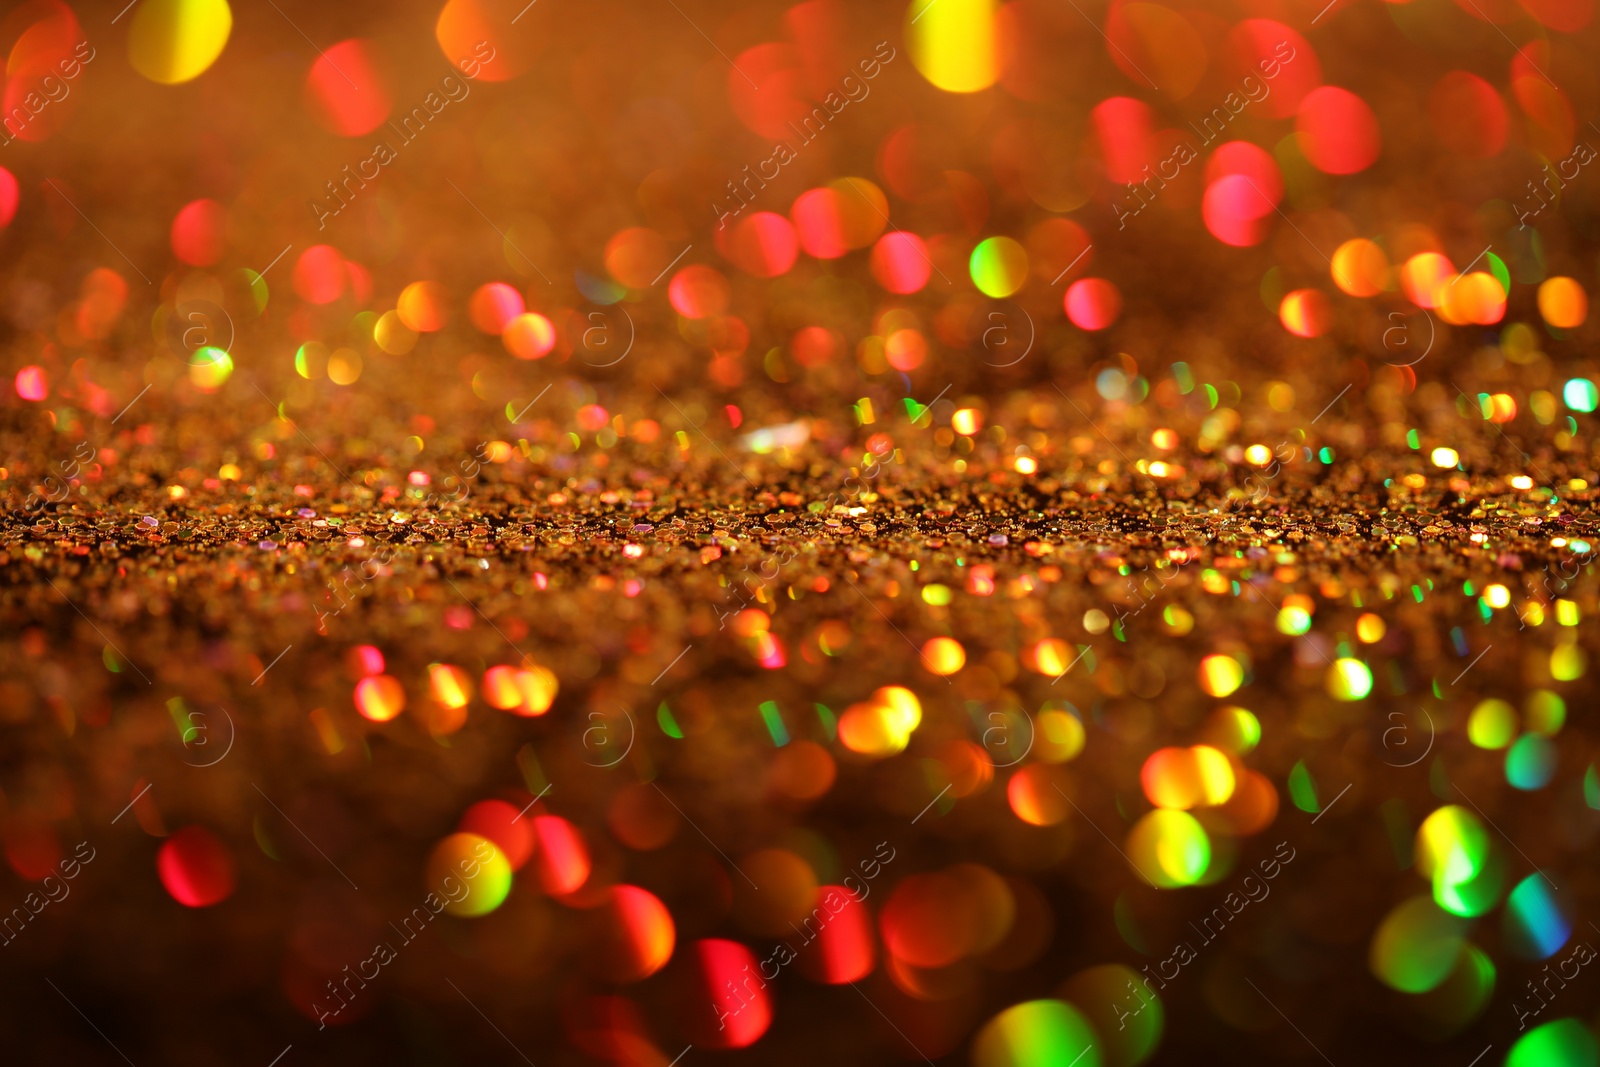 Photo of Shiny golden glitter as background, closeup view